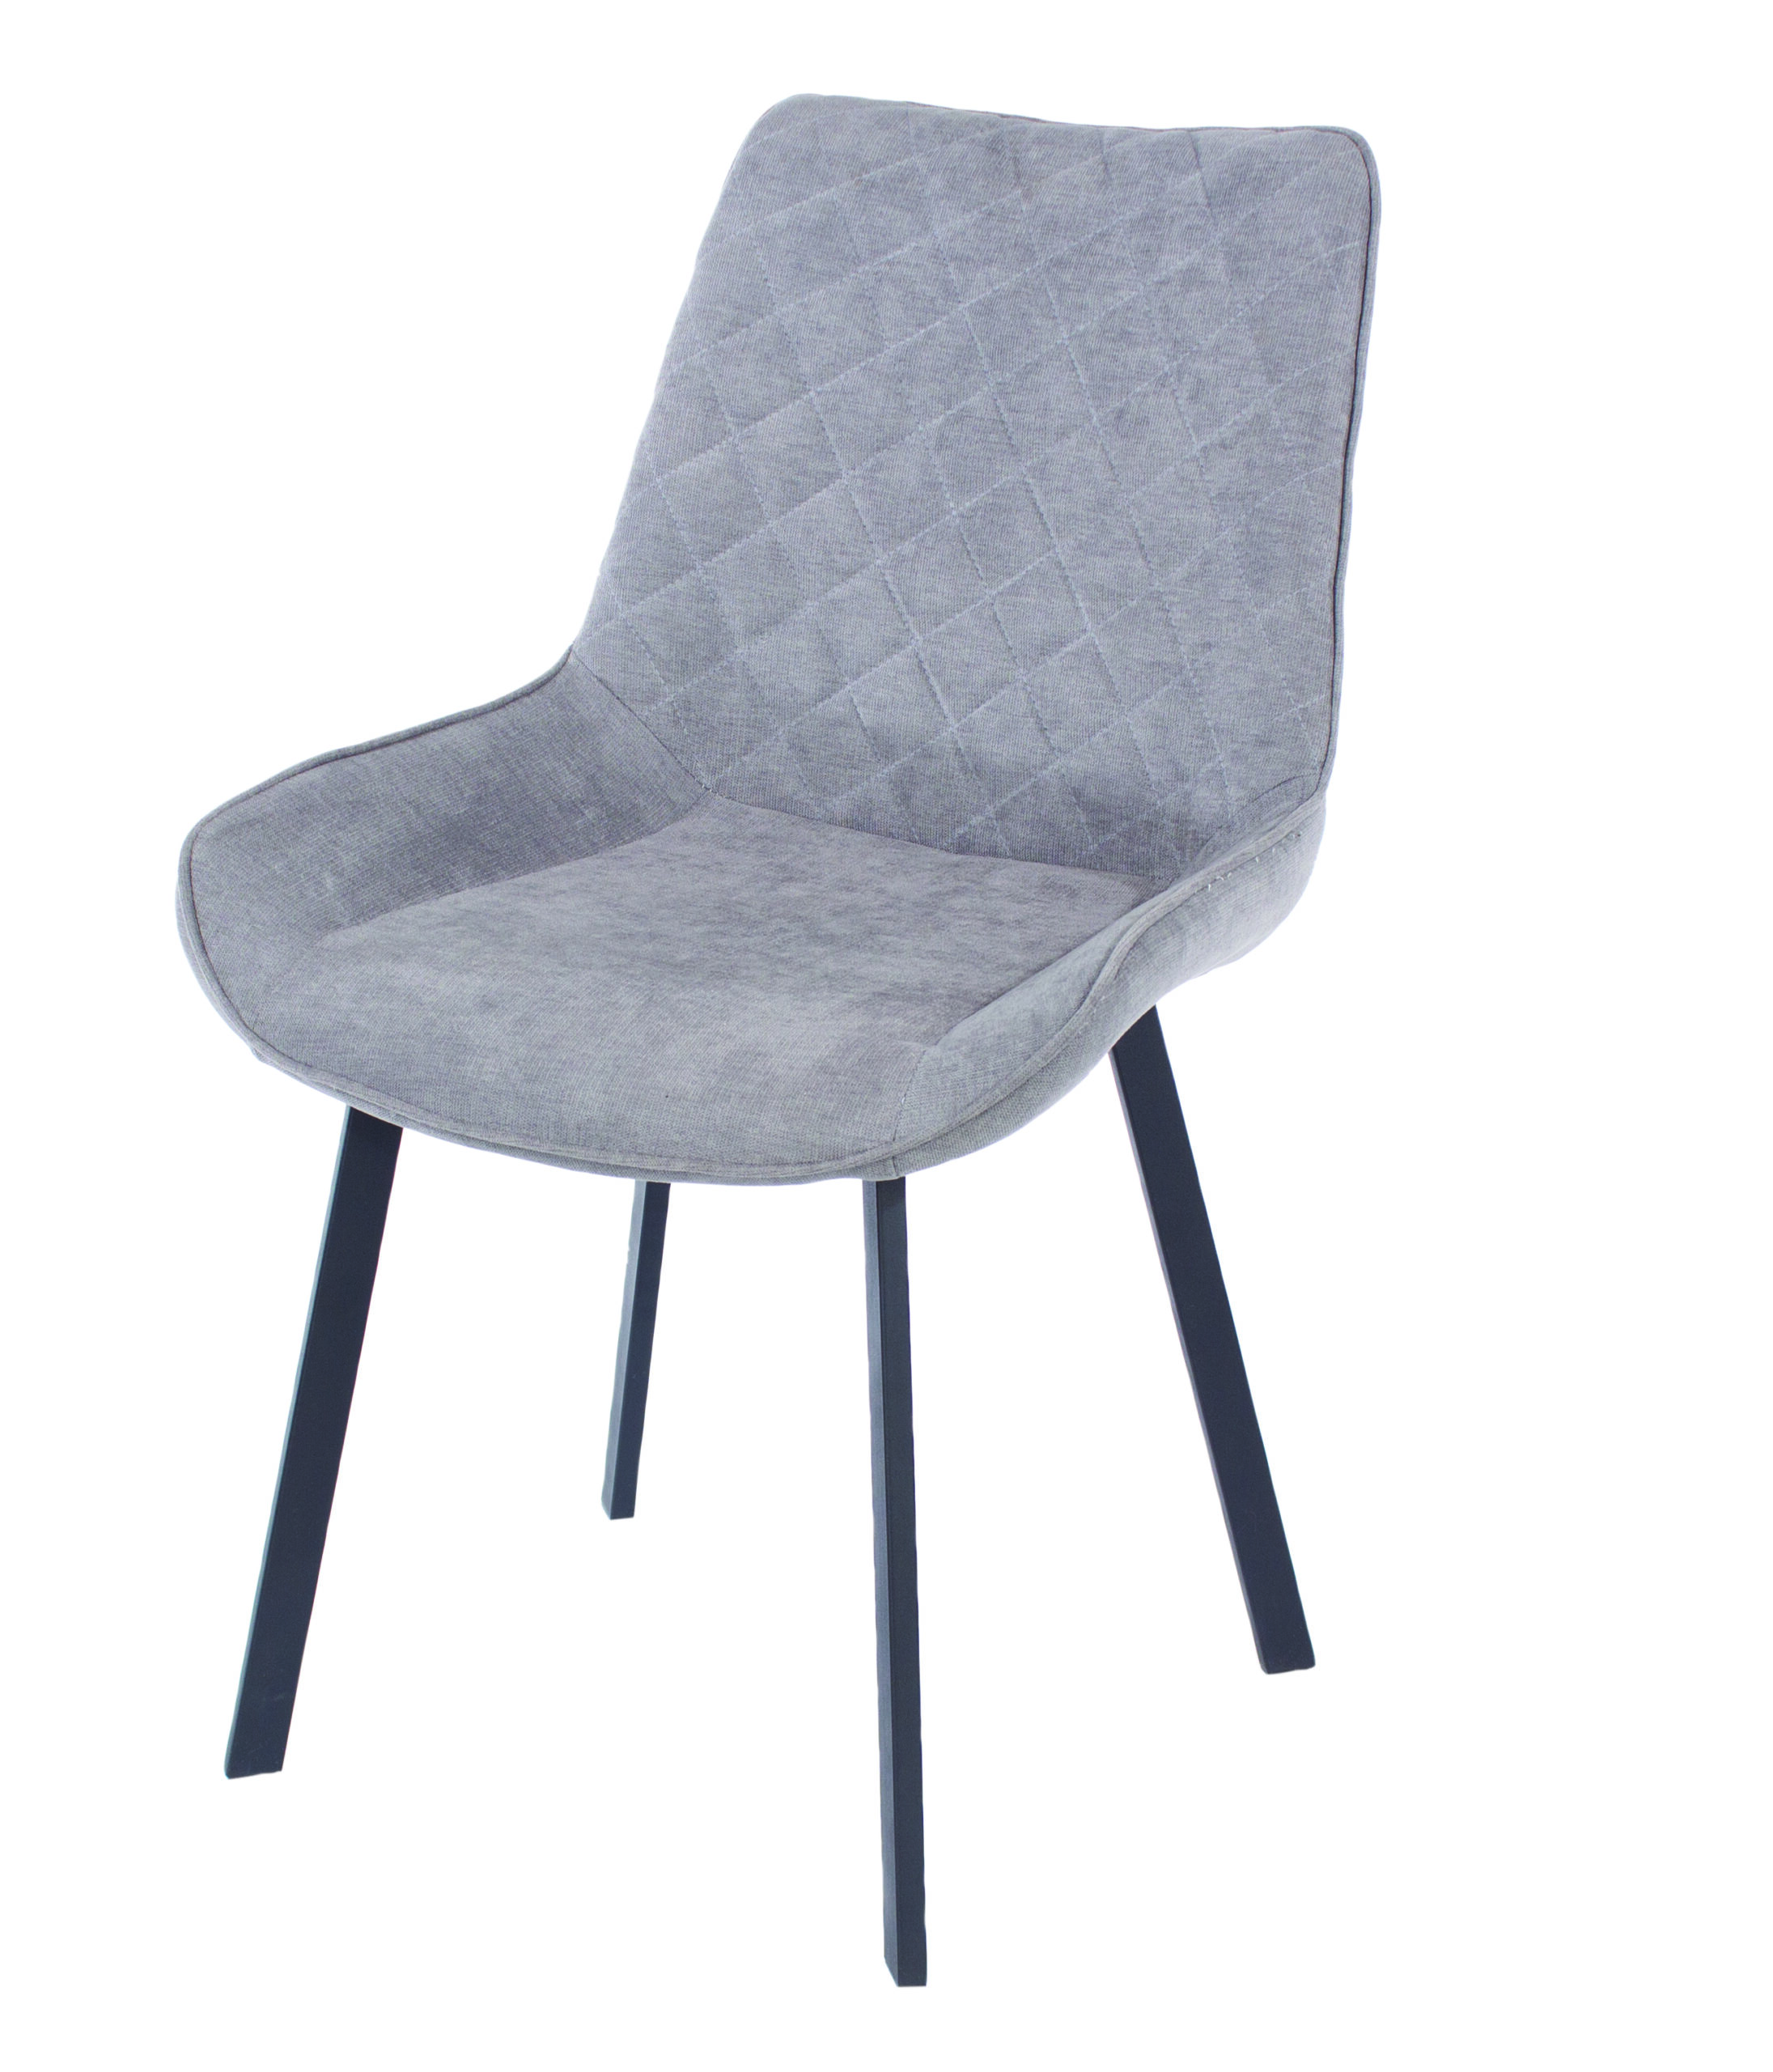 Penny Grey Fabric Chairs Black Metal, Grey Fabric Chair With Black Legs